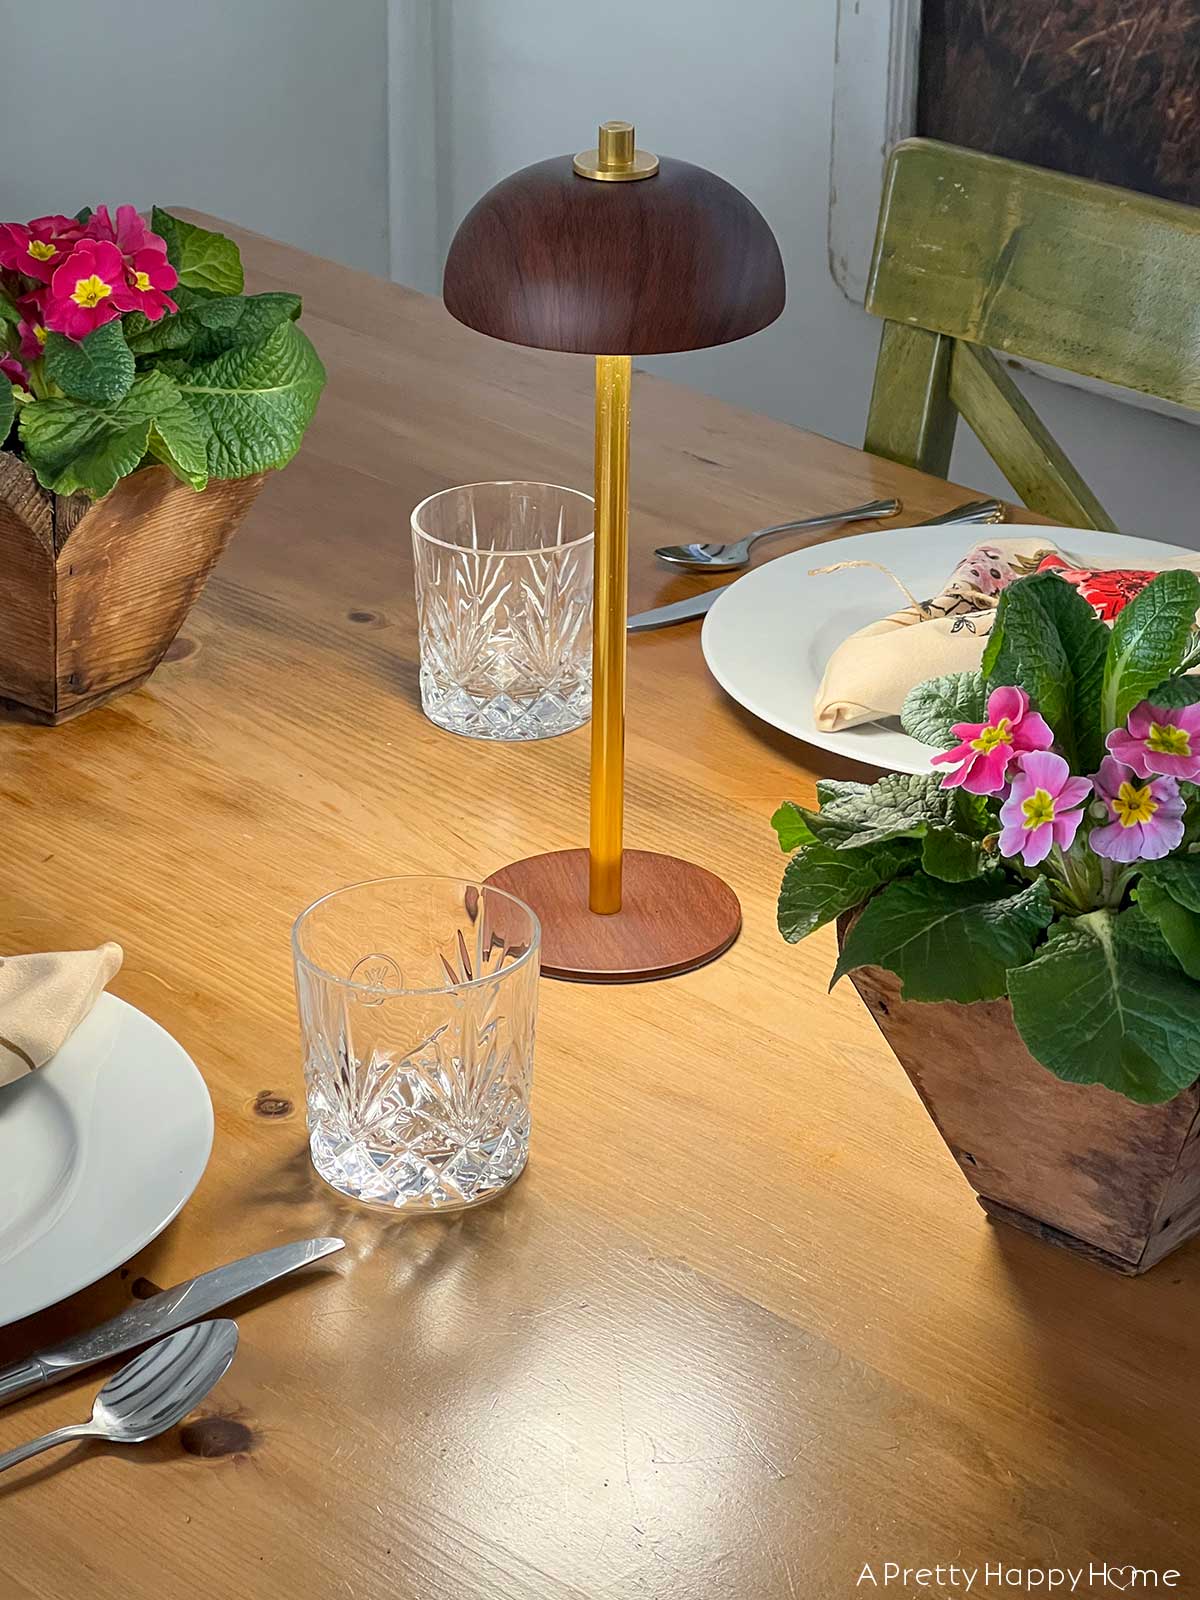 led table lamp for dining table lighting use an led table lamp instead of a centerpiece to create ambiance at home